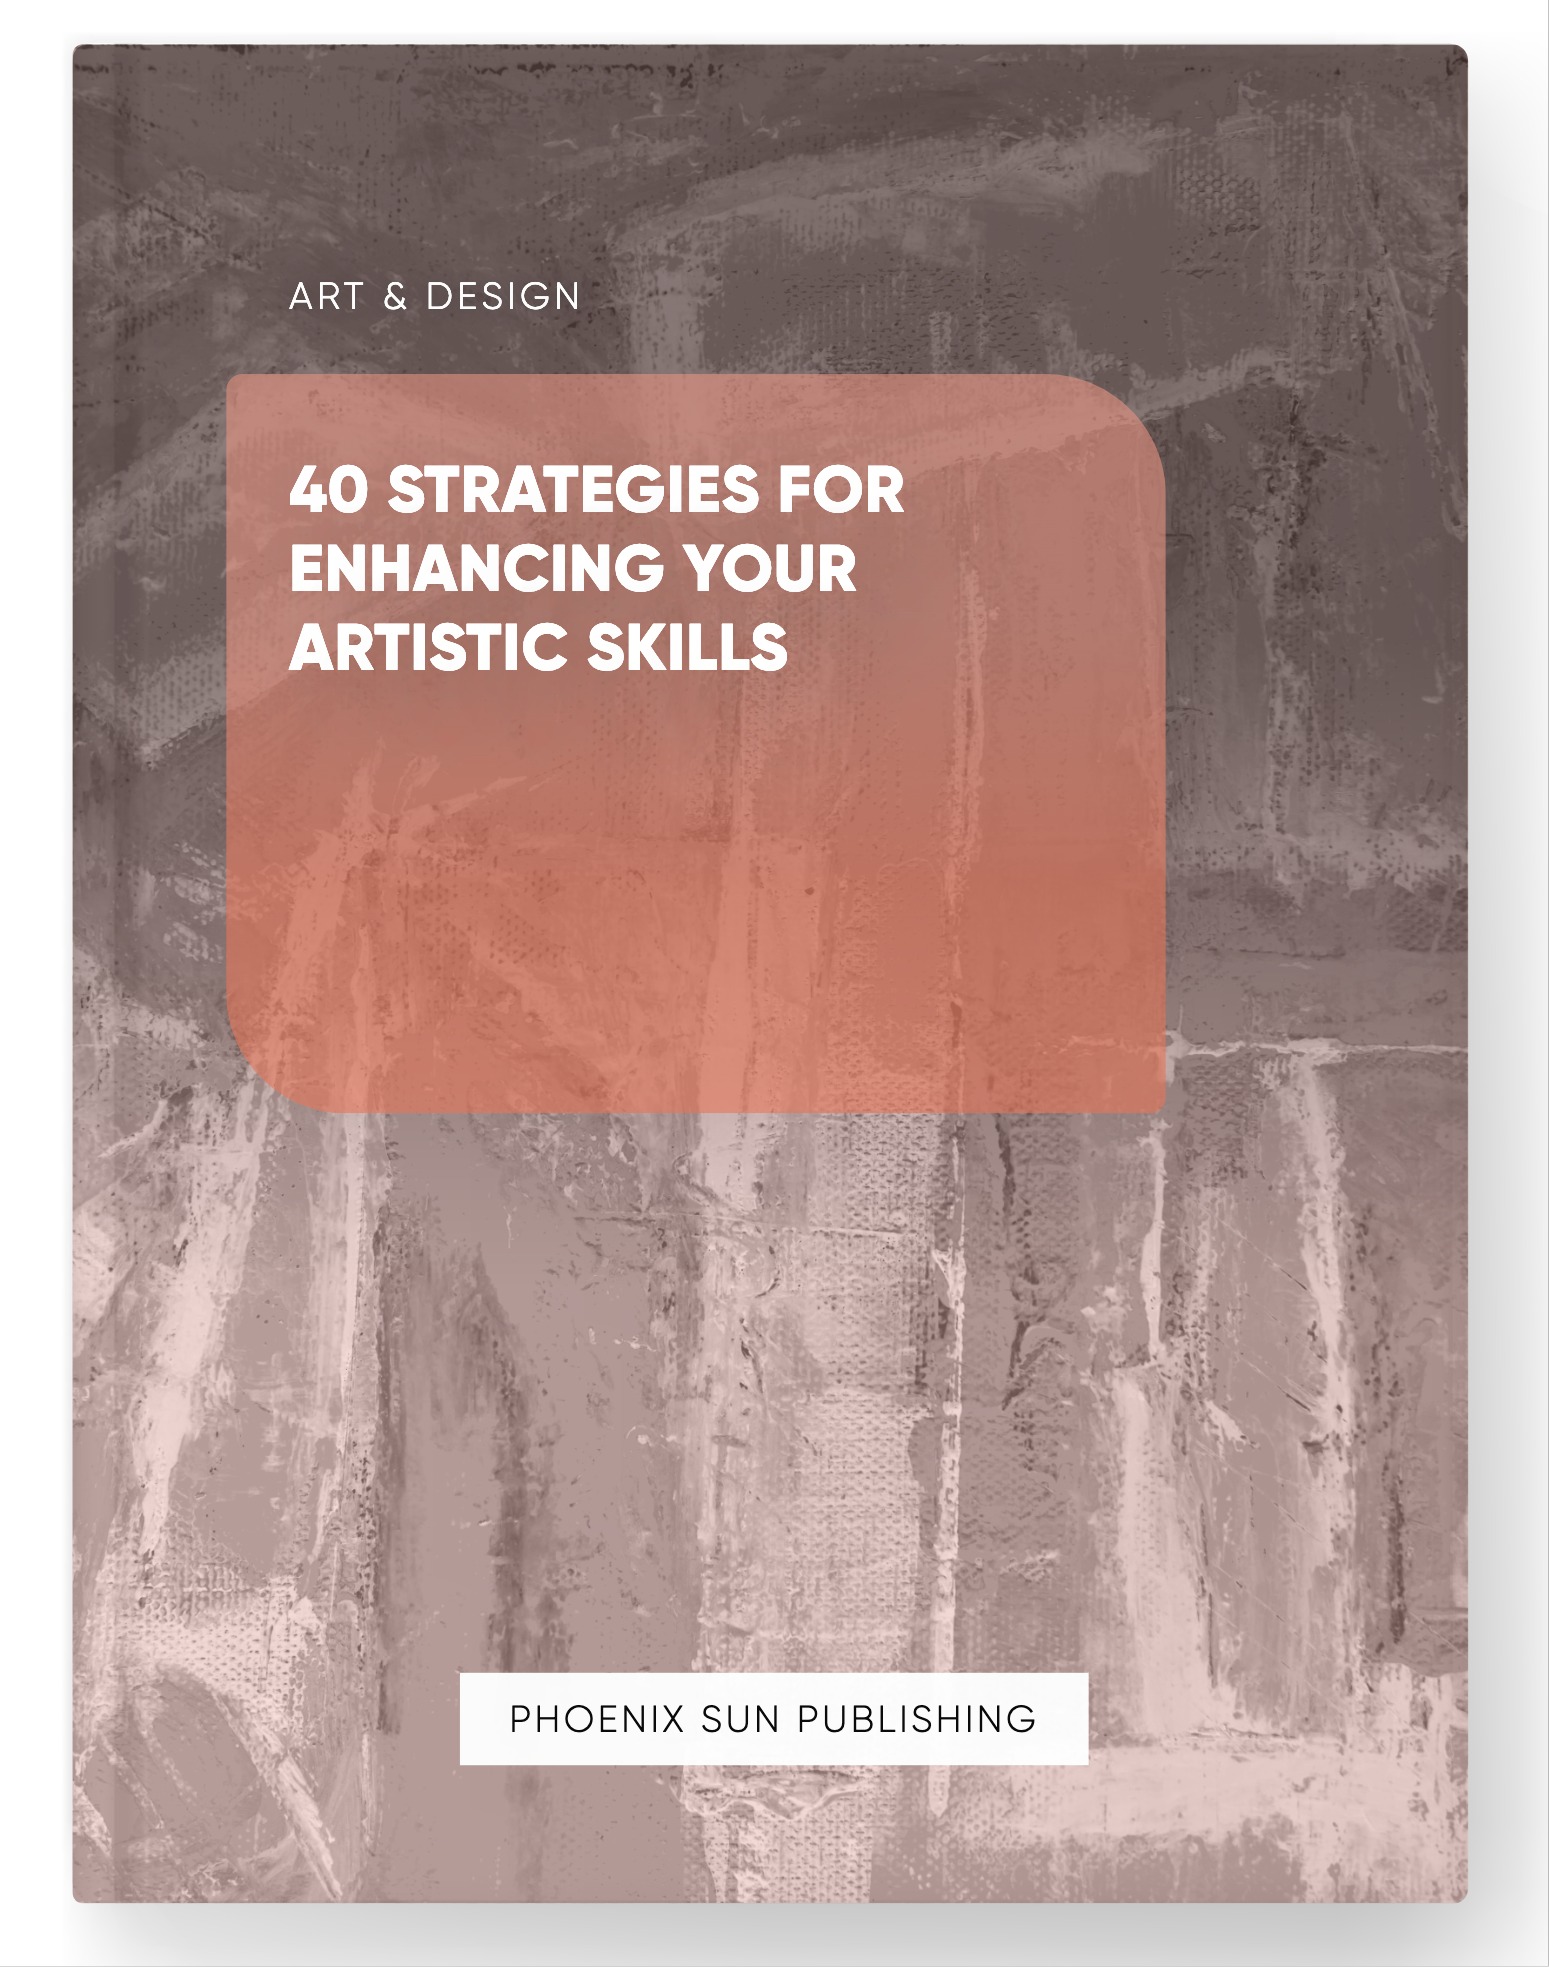 40 Strategies for Enhancing Your Artistic Skills